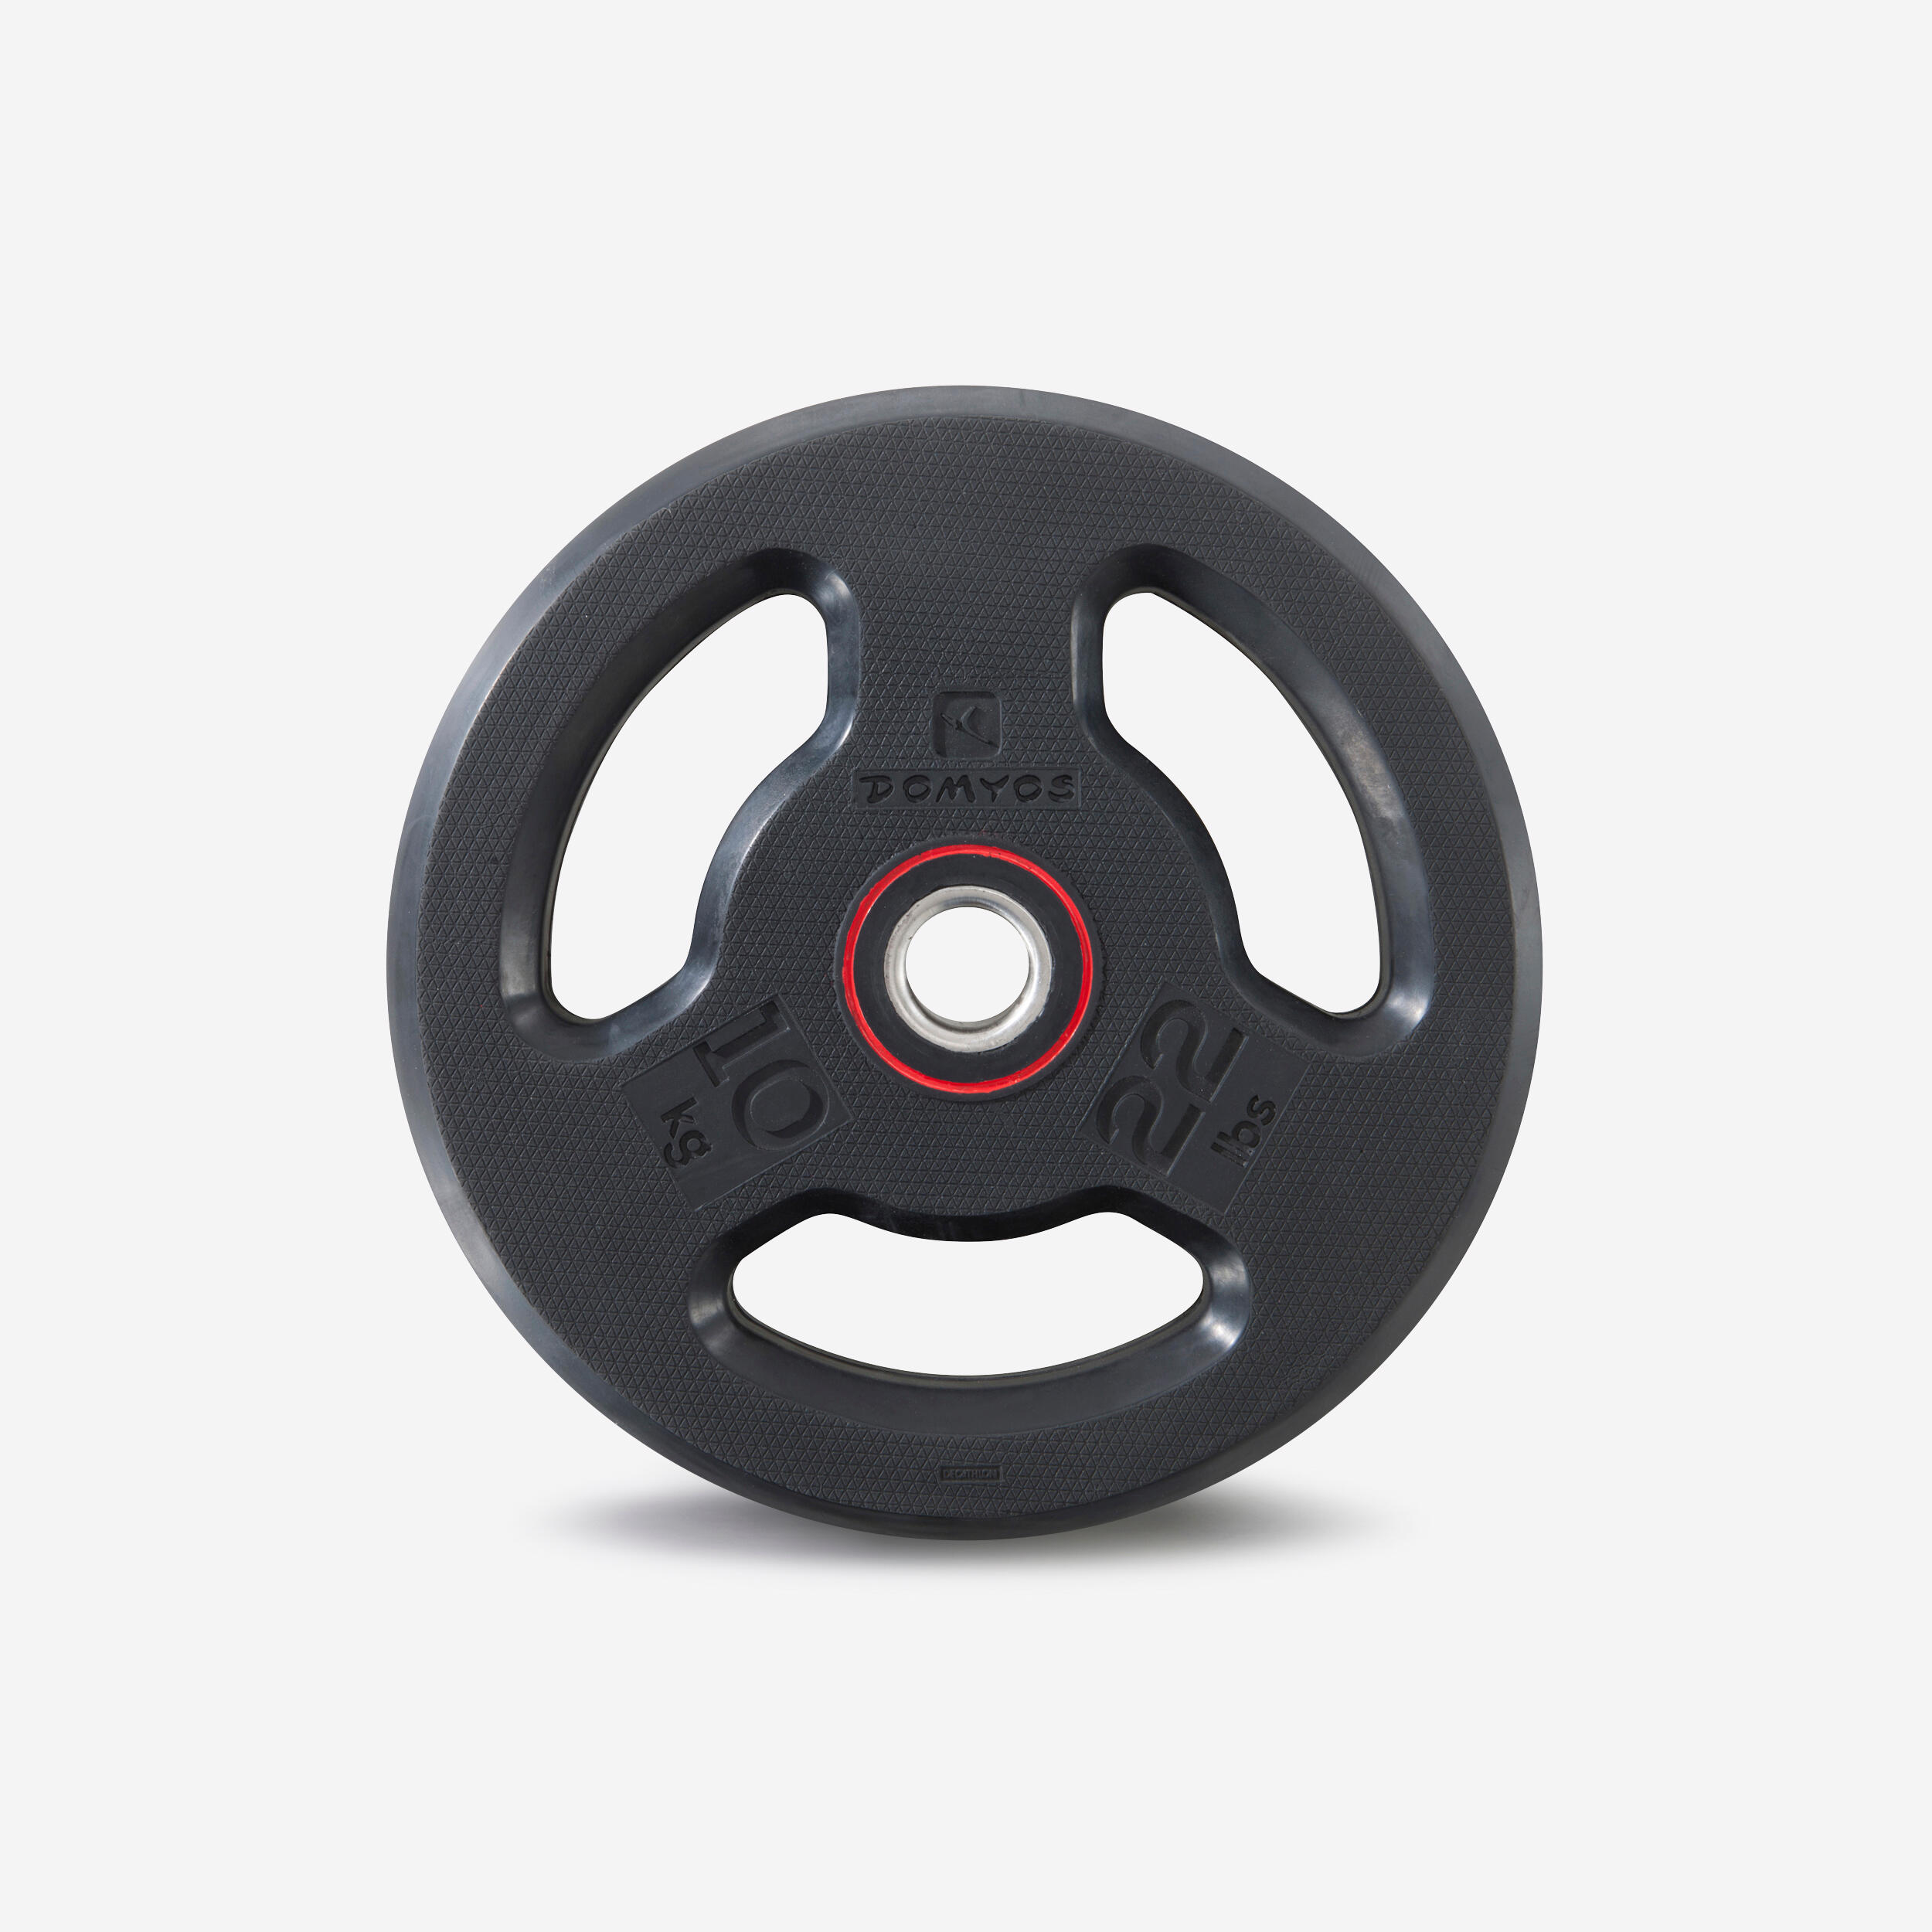 10 kg (22 lb) Rubber Weight Plate with Handles - CORENGTH